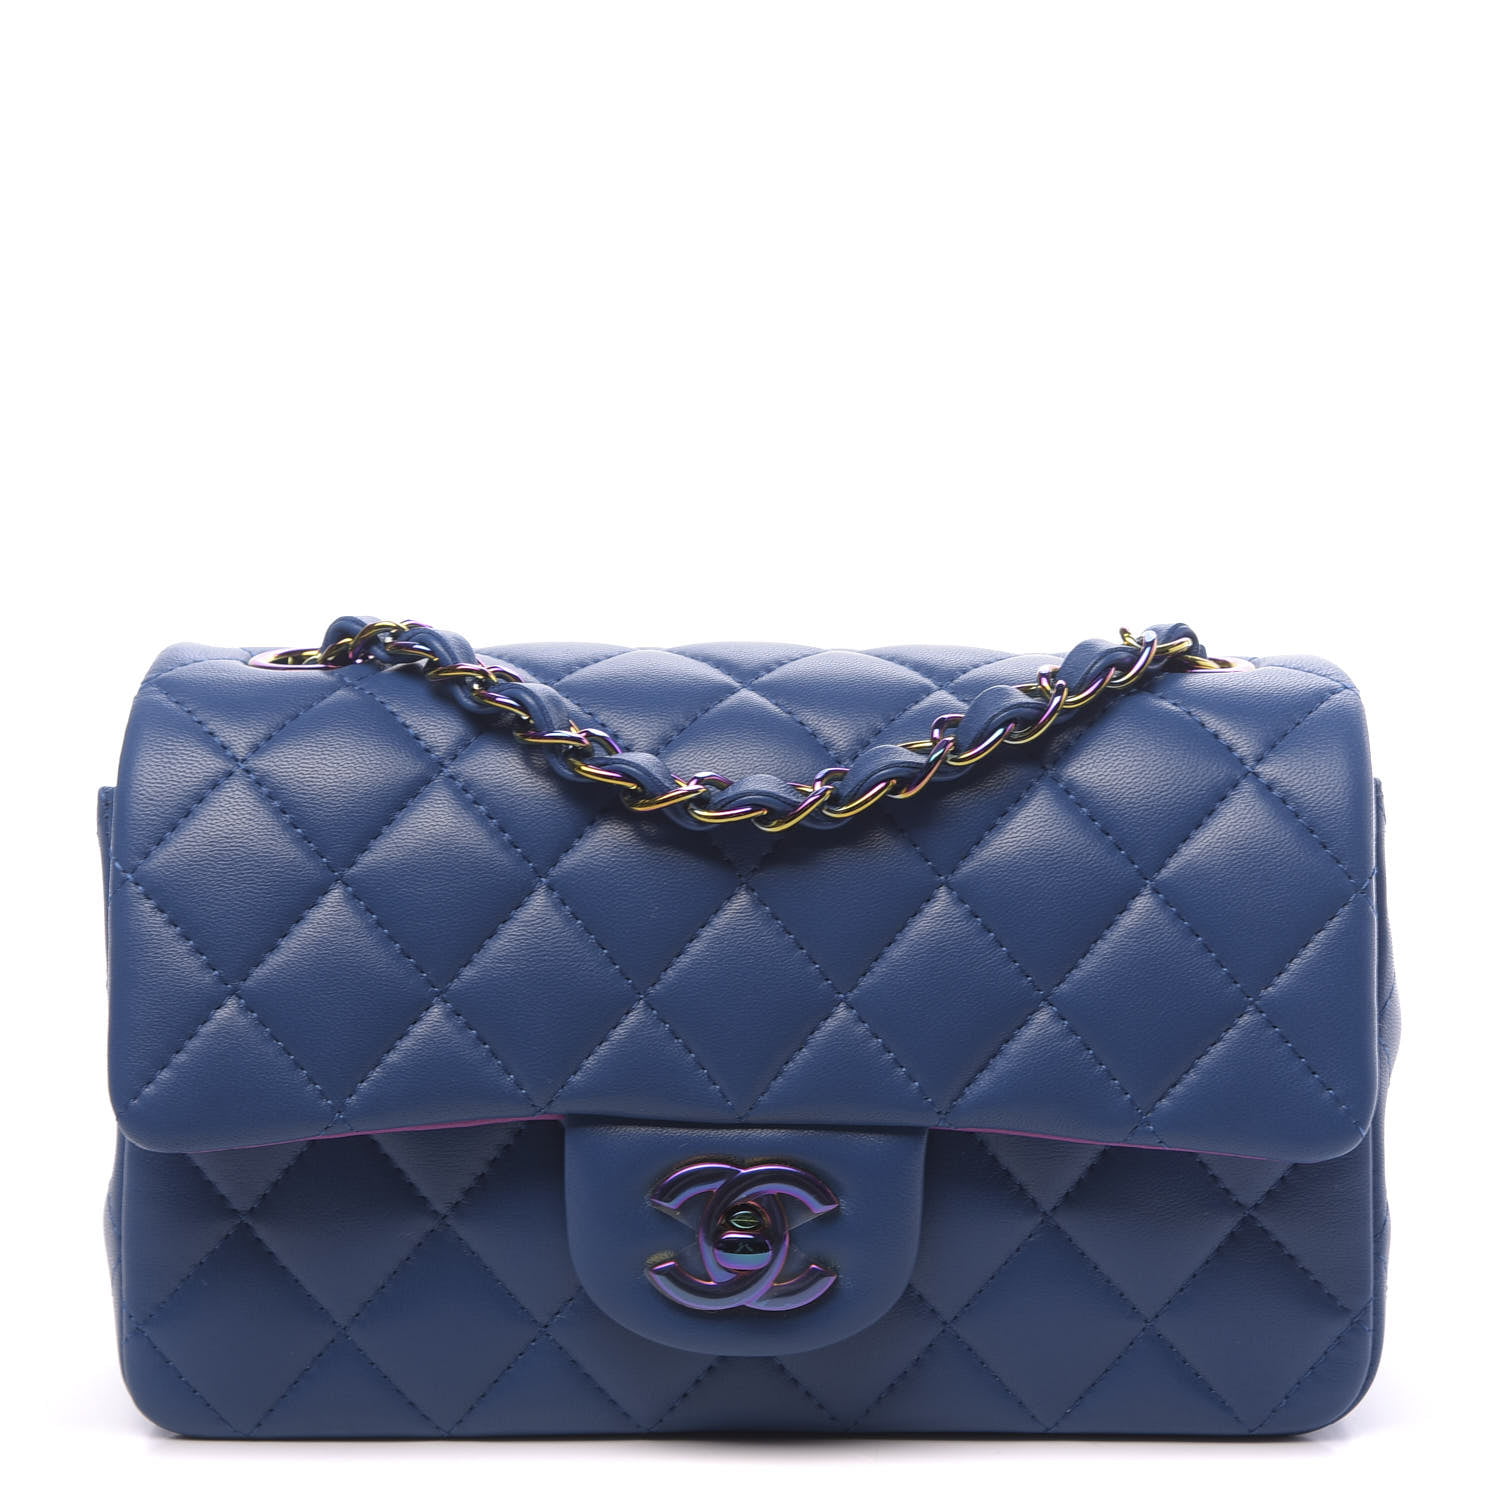 Chanel 22: Once a Hard Pass, Now a Must Have - PurseBop